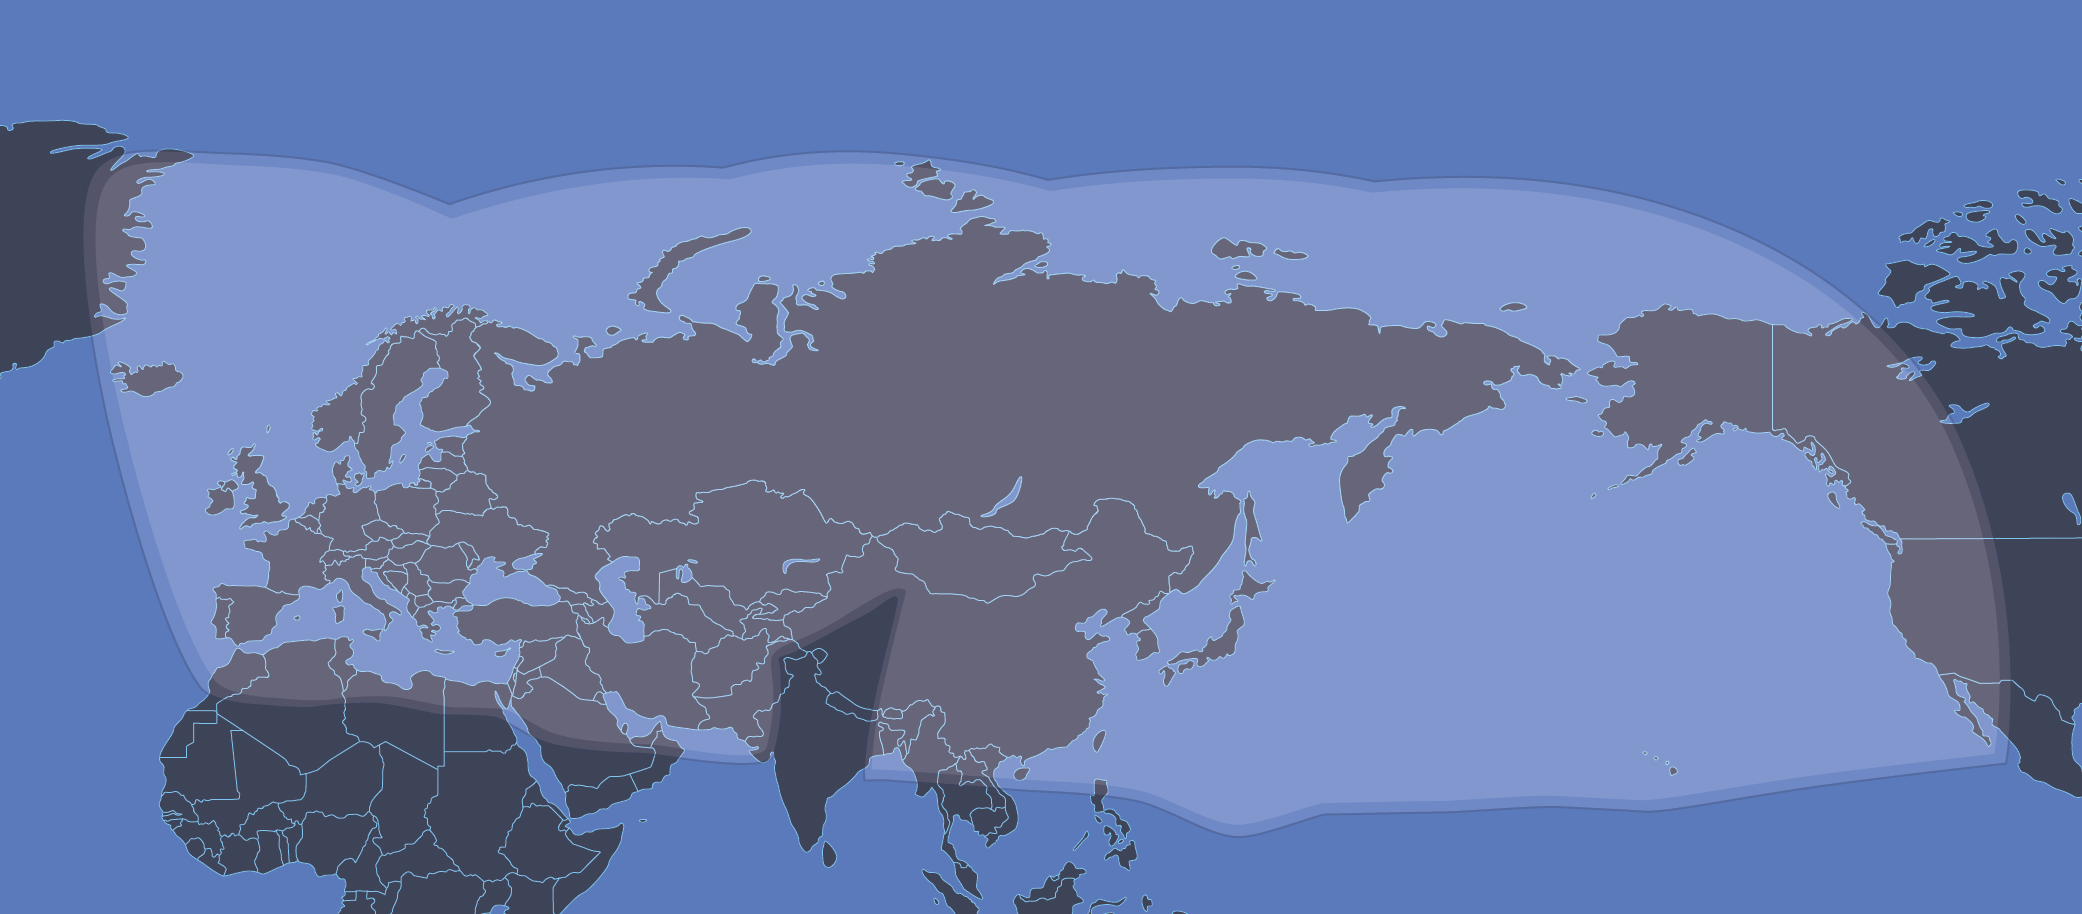 Coverage area of AltegroSky Network